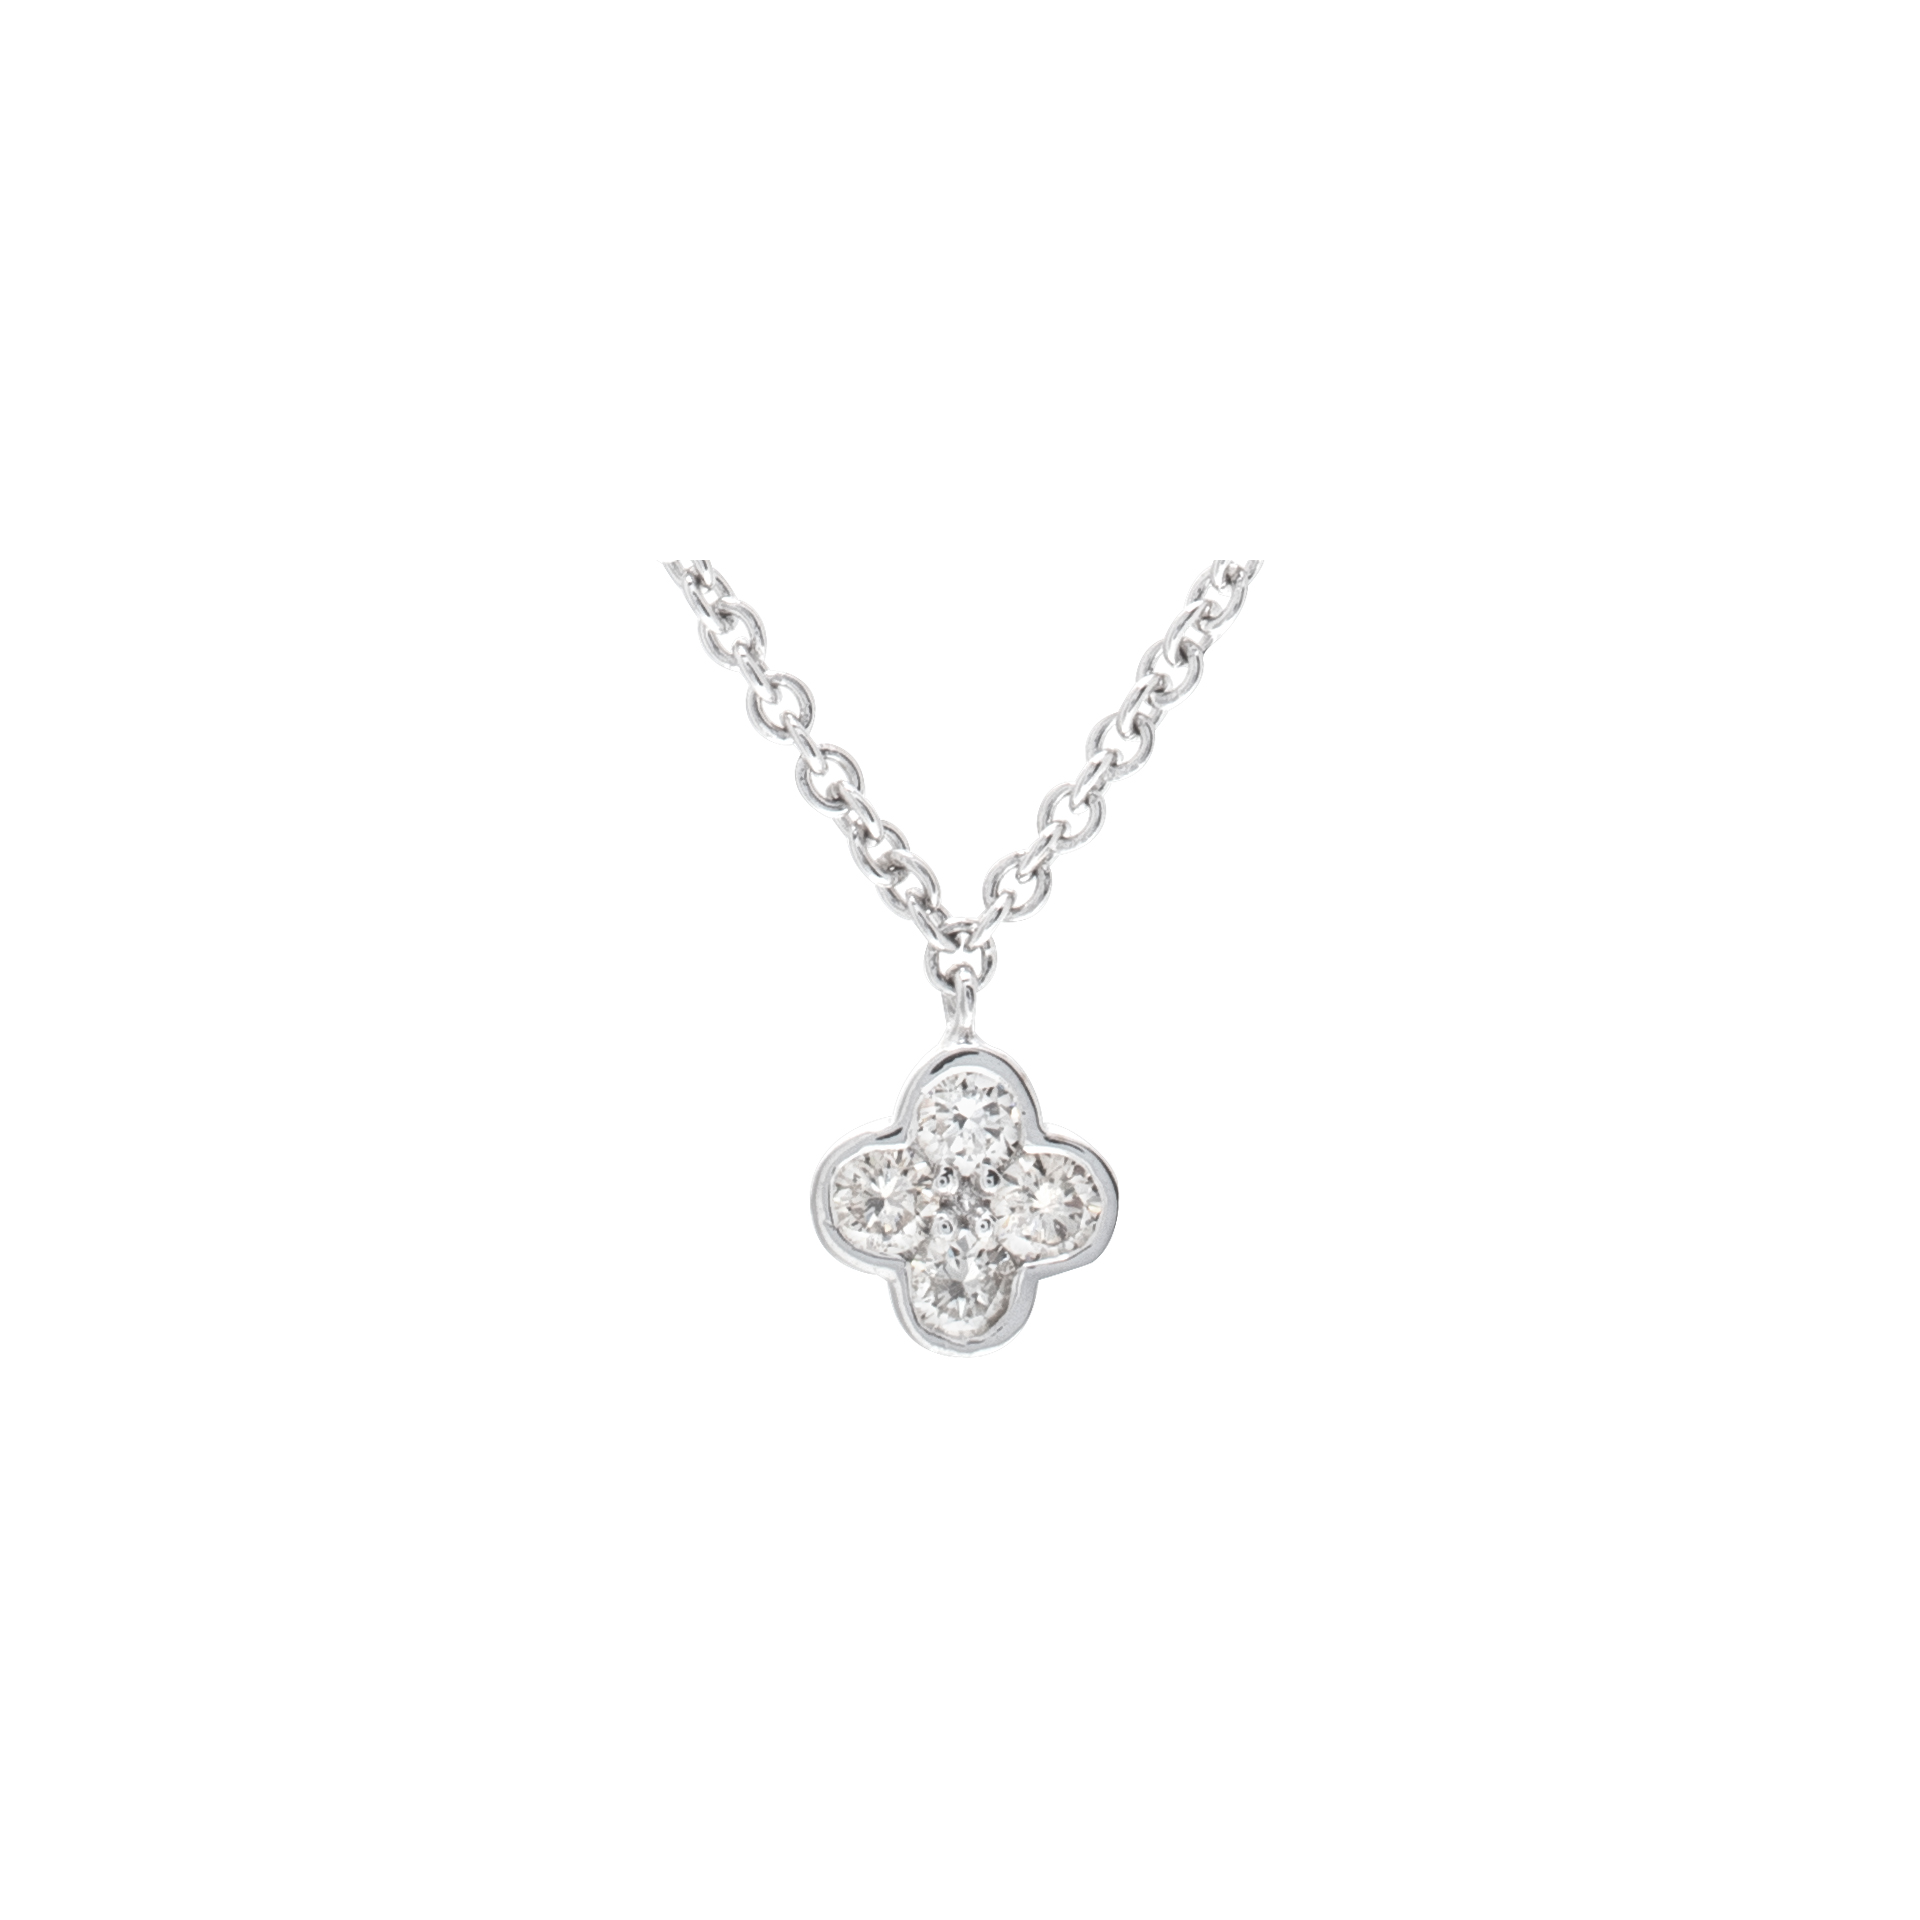 "Diamonds by the Yard" wih flower pendant and star motifs, set in 18K white gold with an 18 inches chain. Total diamonds approx. weight: 0.82 carat.